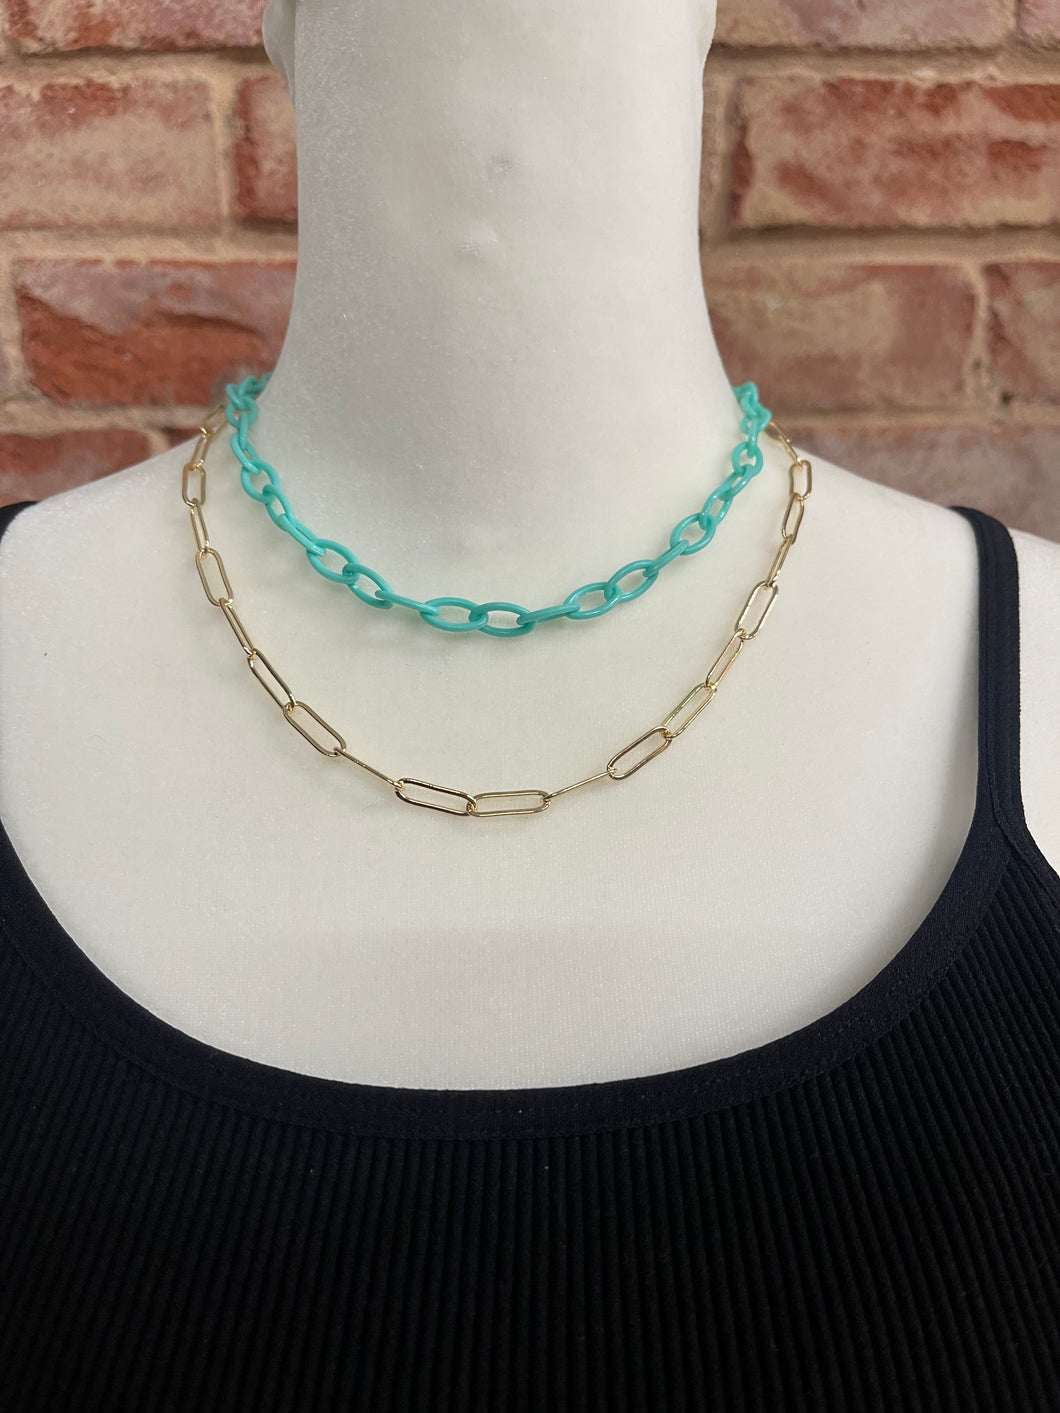 Turquoise Chain Layered Necklace w/ Earrings